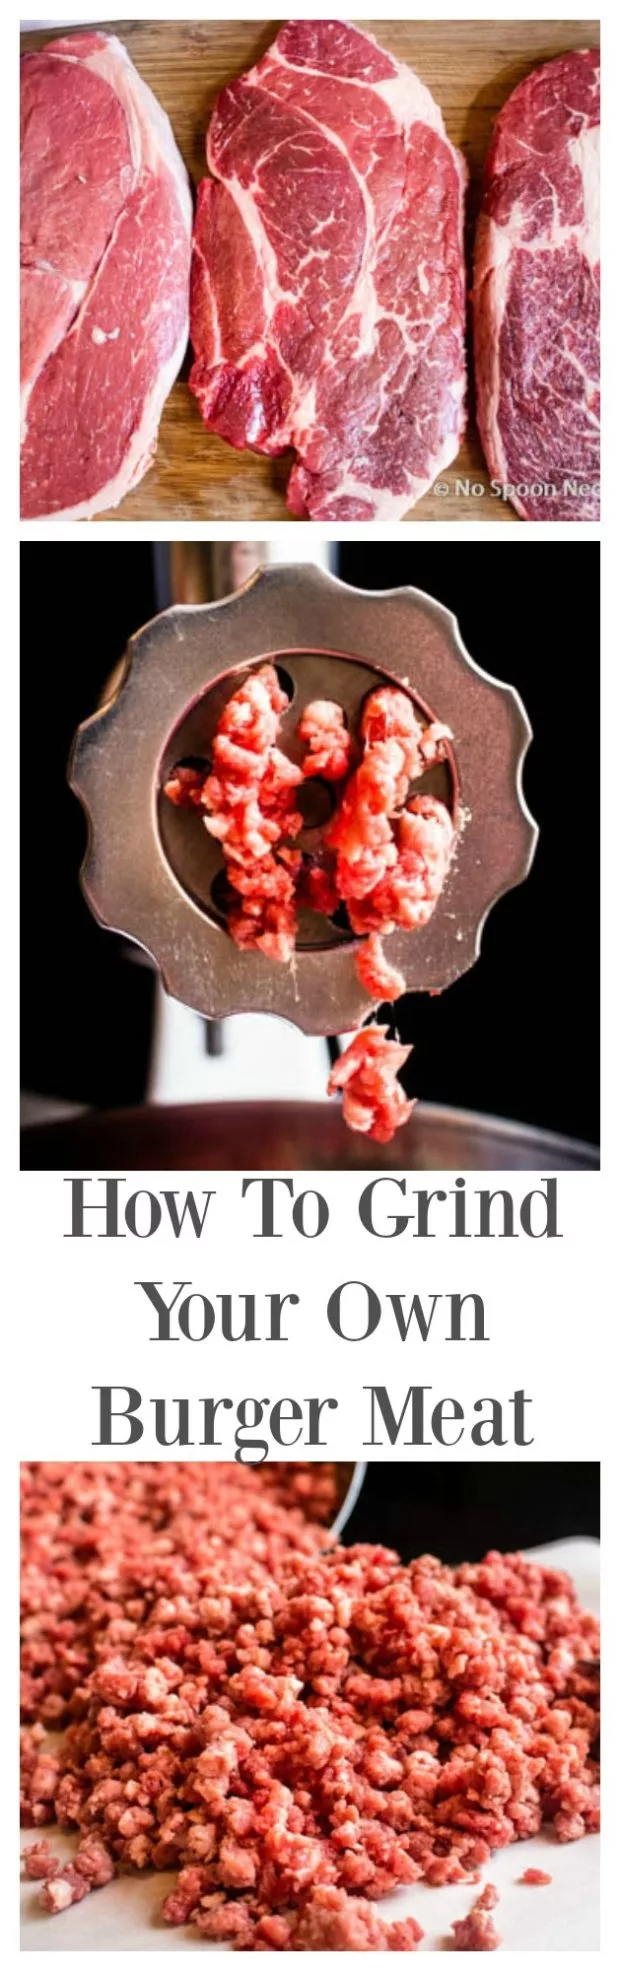 How To Grind Your Own Burger Meat